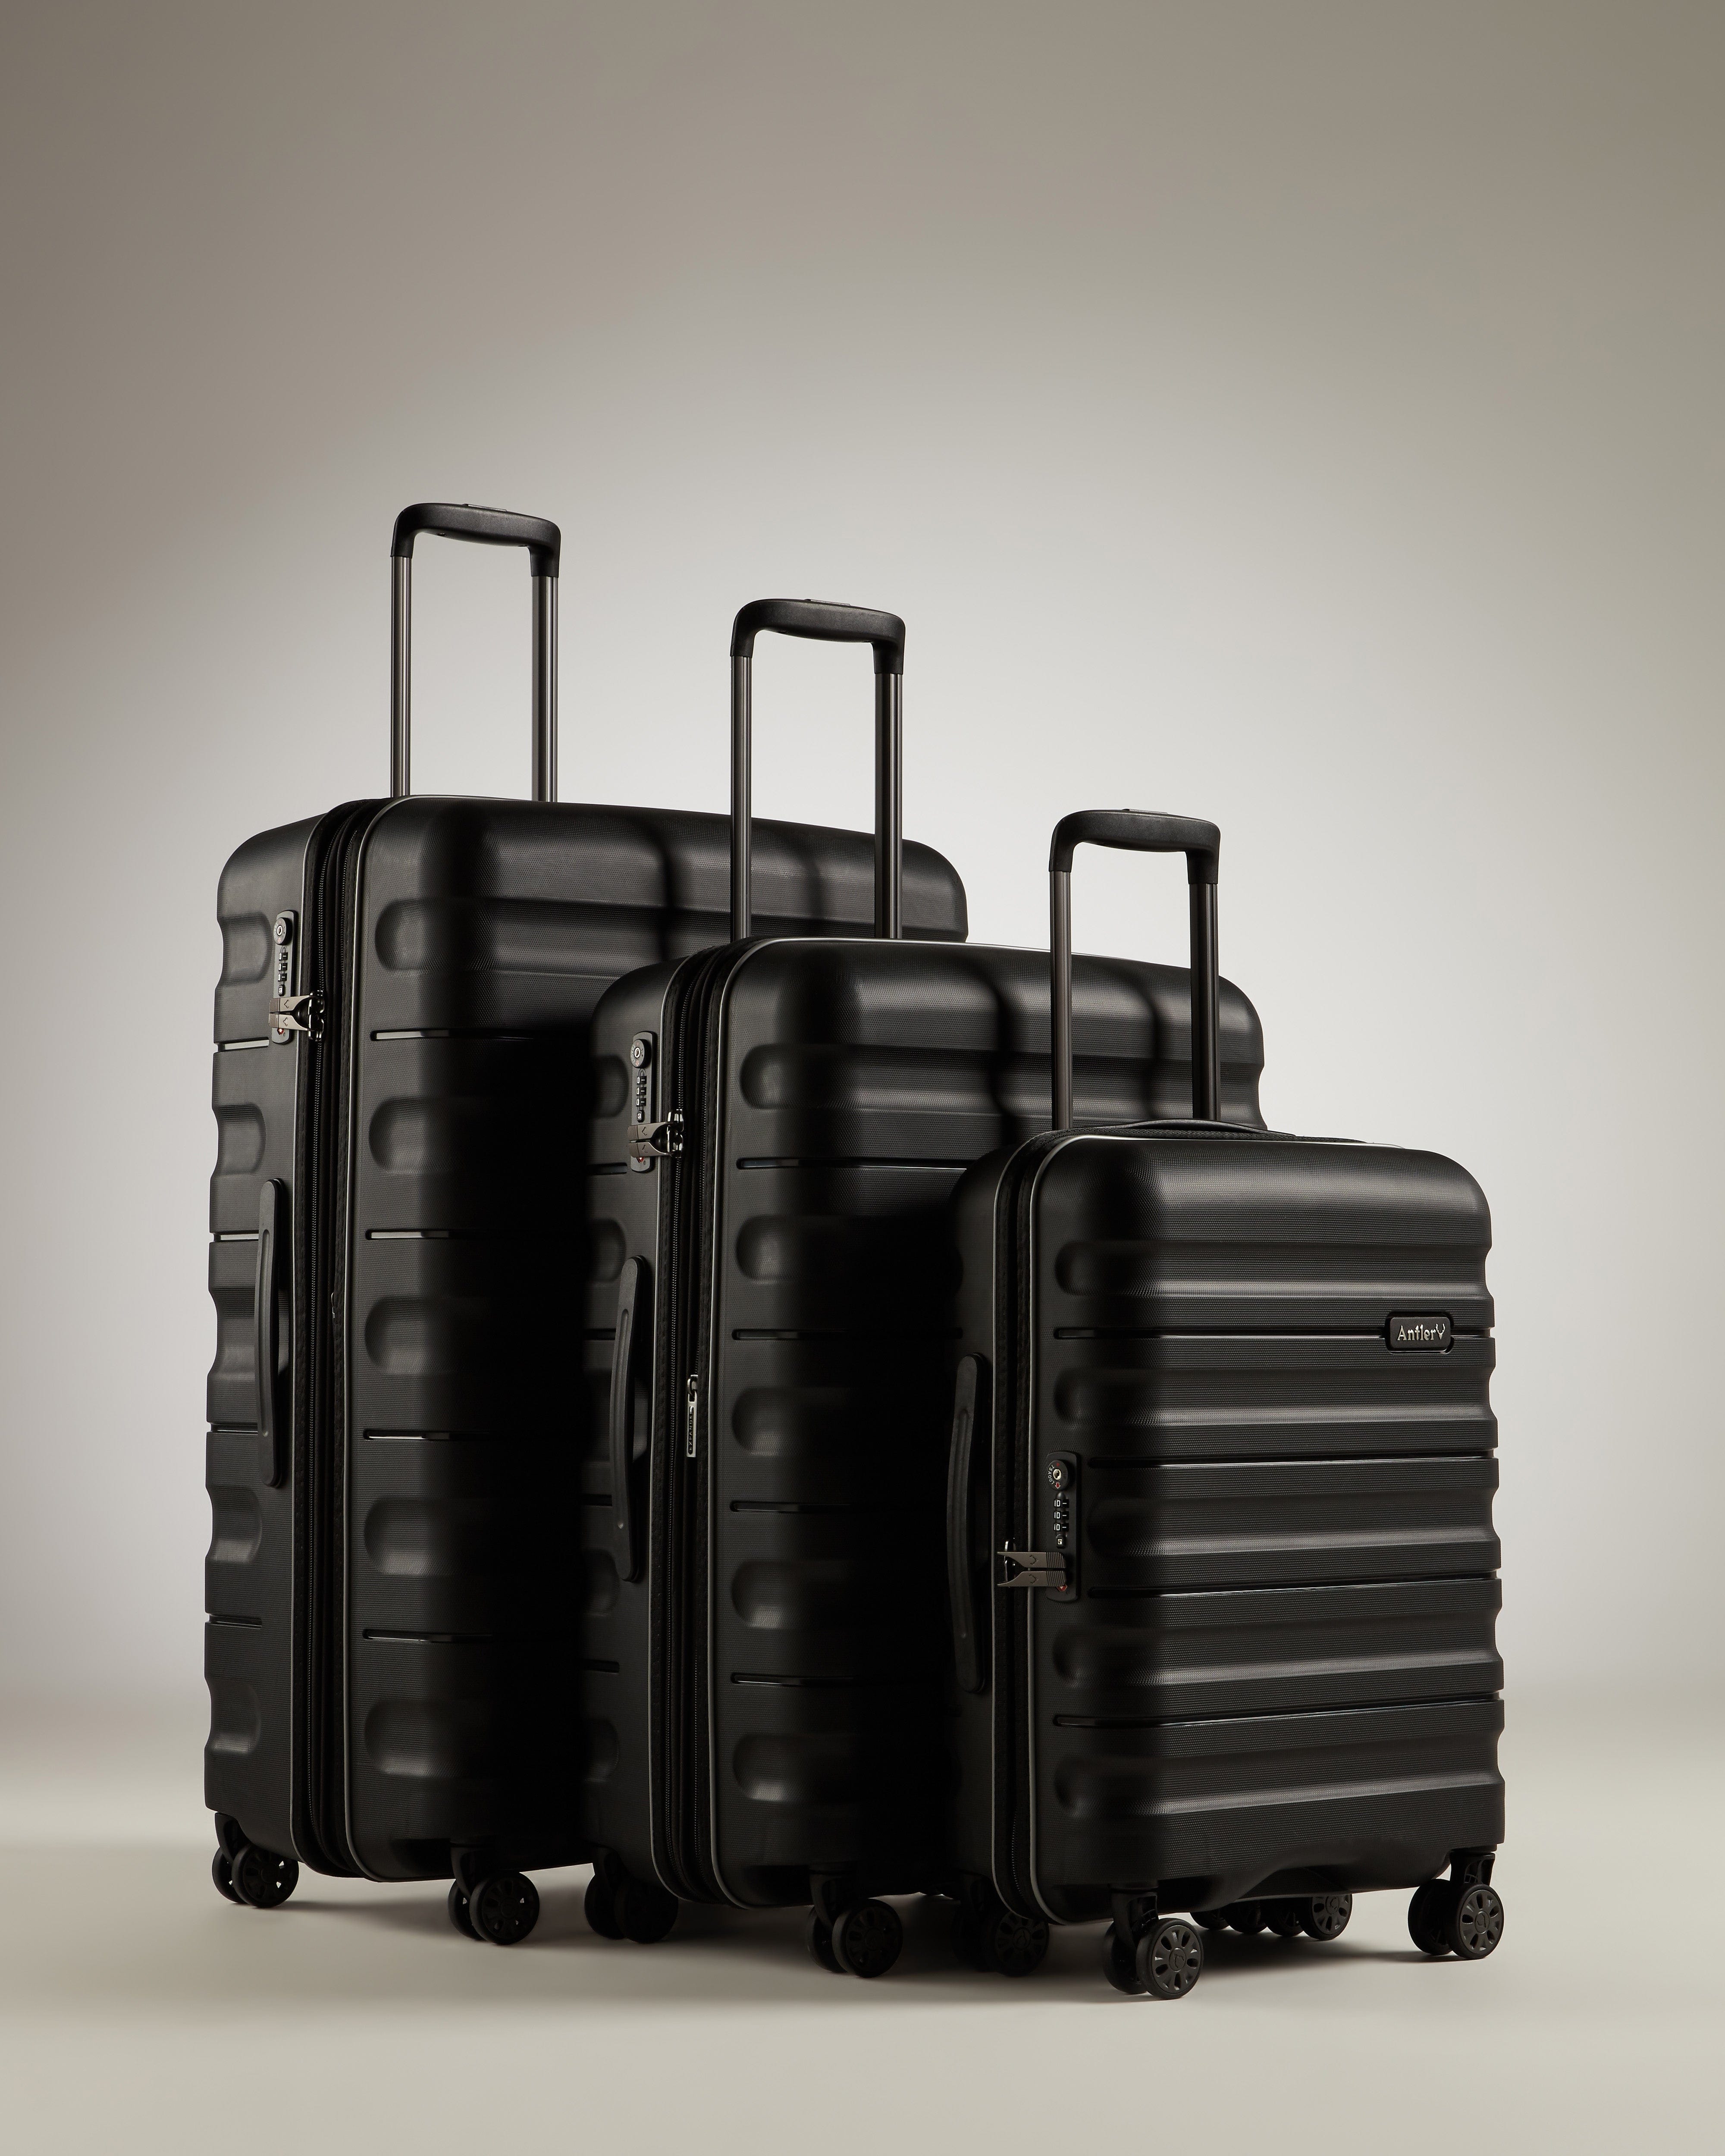 View Antler Lincoln Suitcase Set In Black information